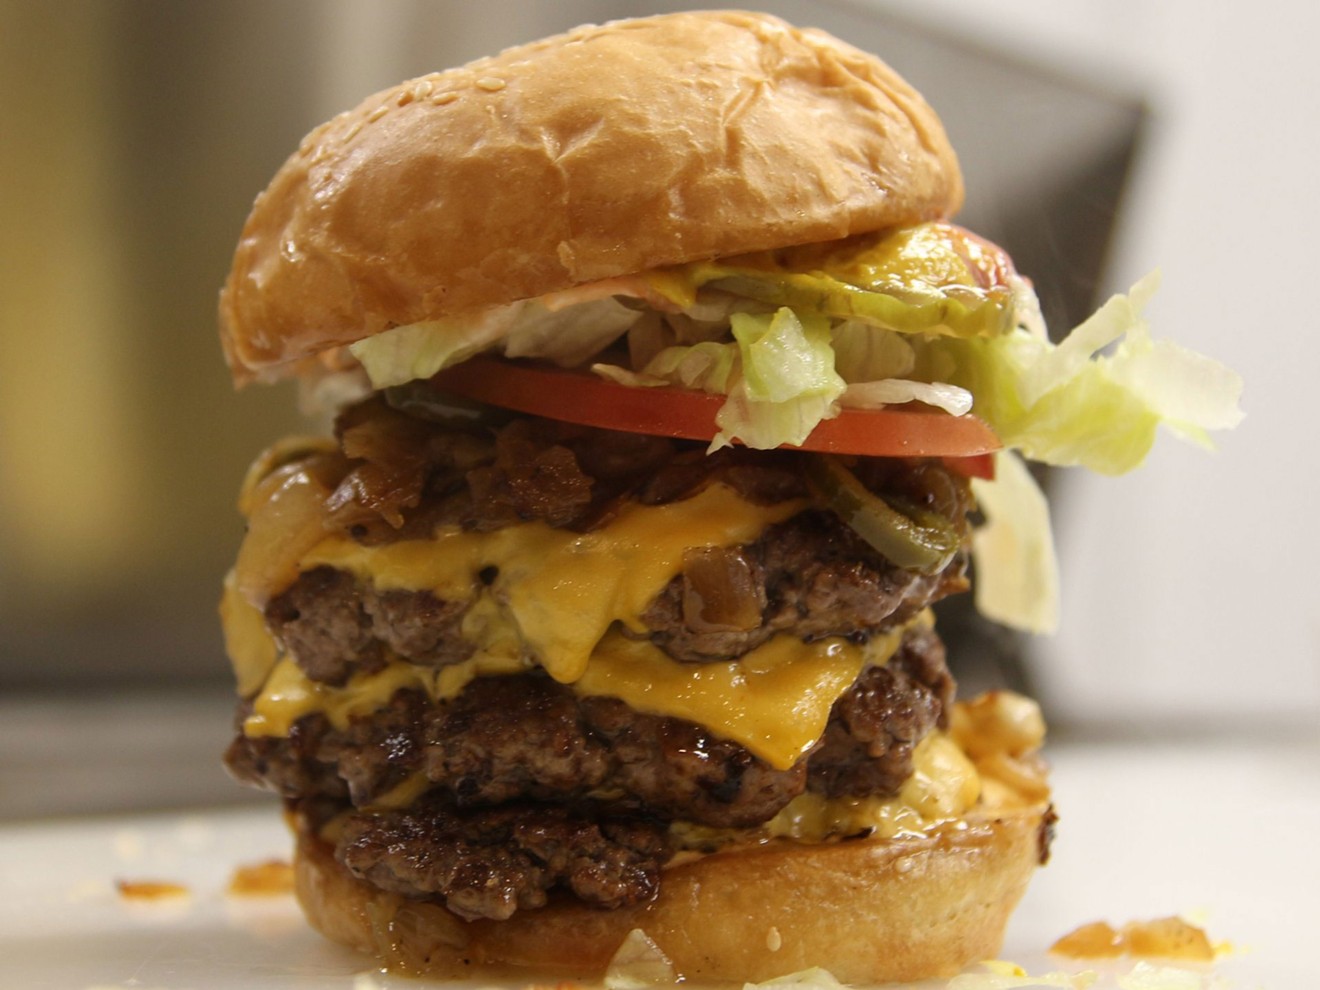 A triple burger is made-to-order and $7.49 ($8.99 with cheese) at Sky Rocket.